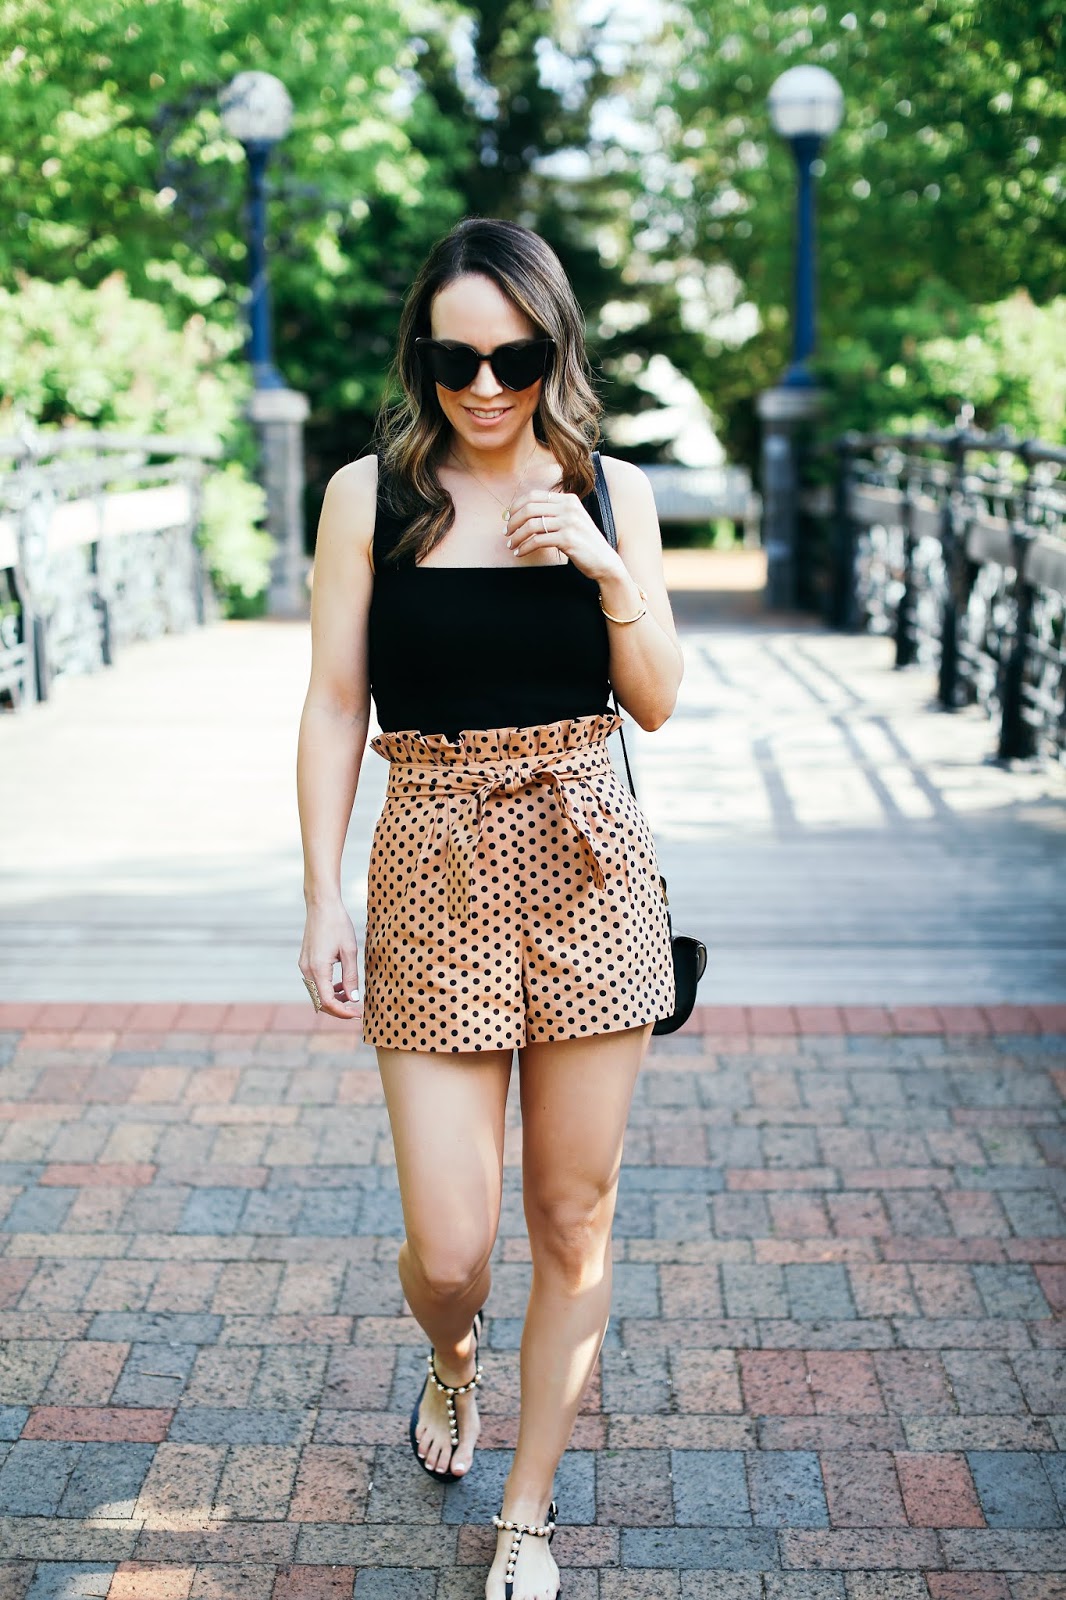 The Style of Shorts That Looks the Most Flattering - alittlebitetc